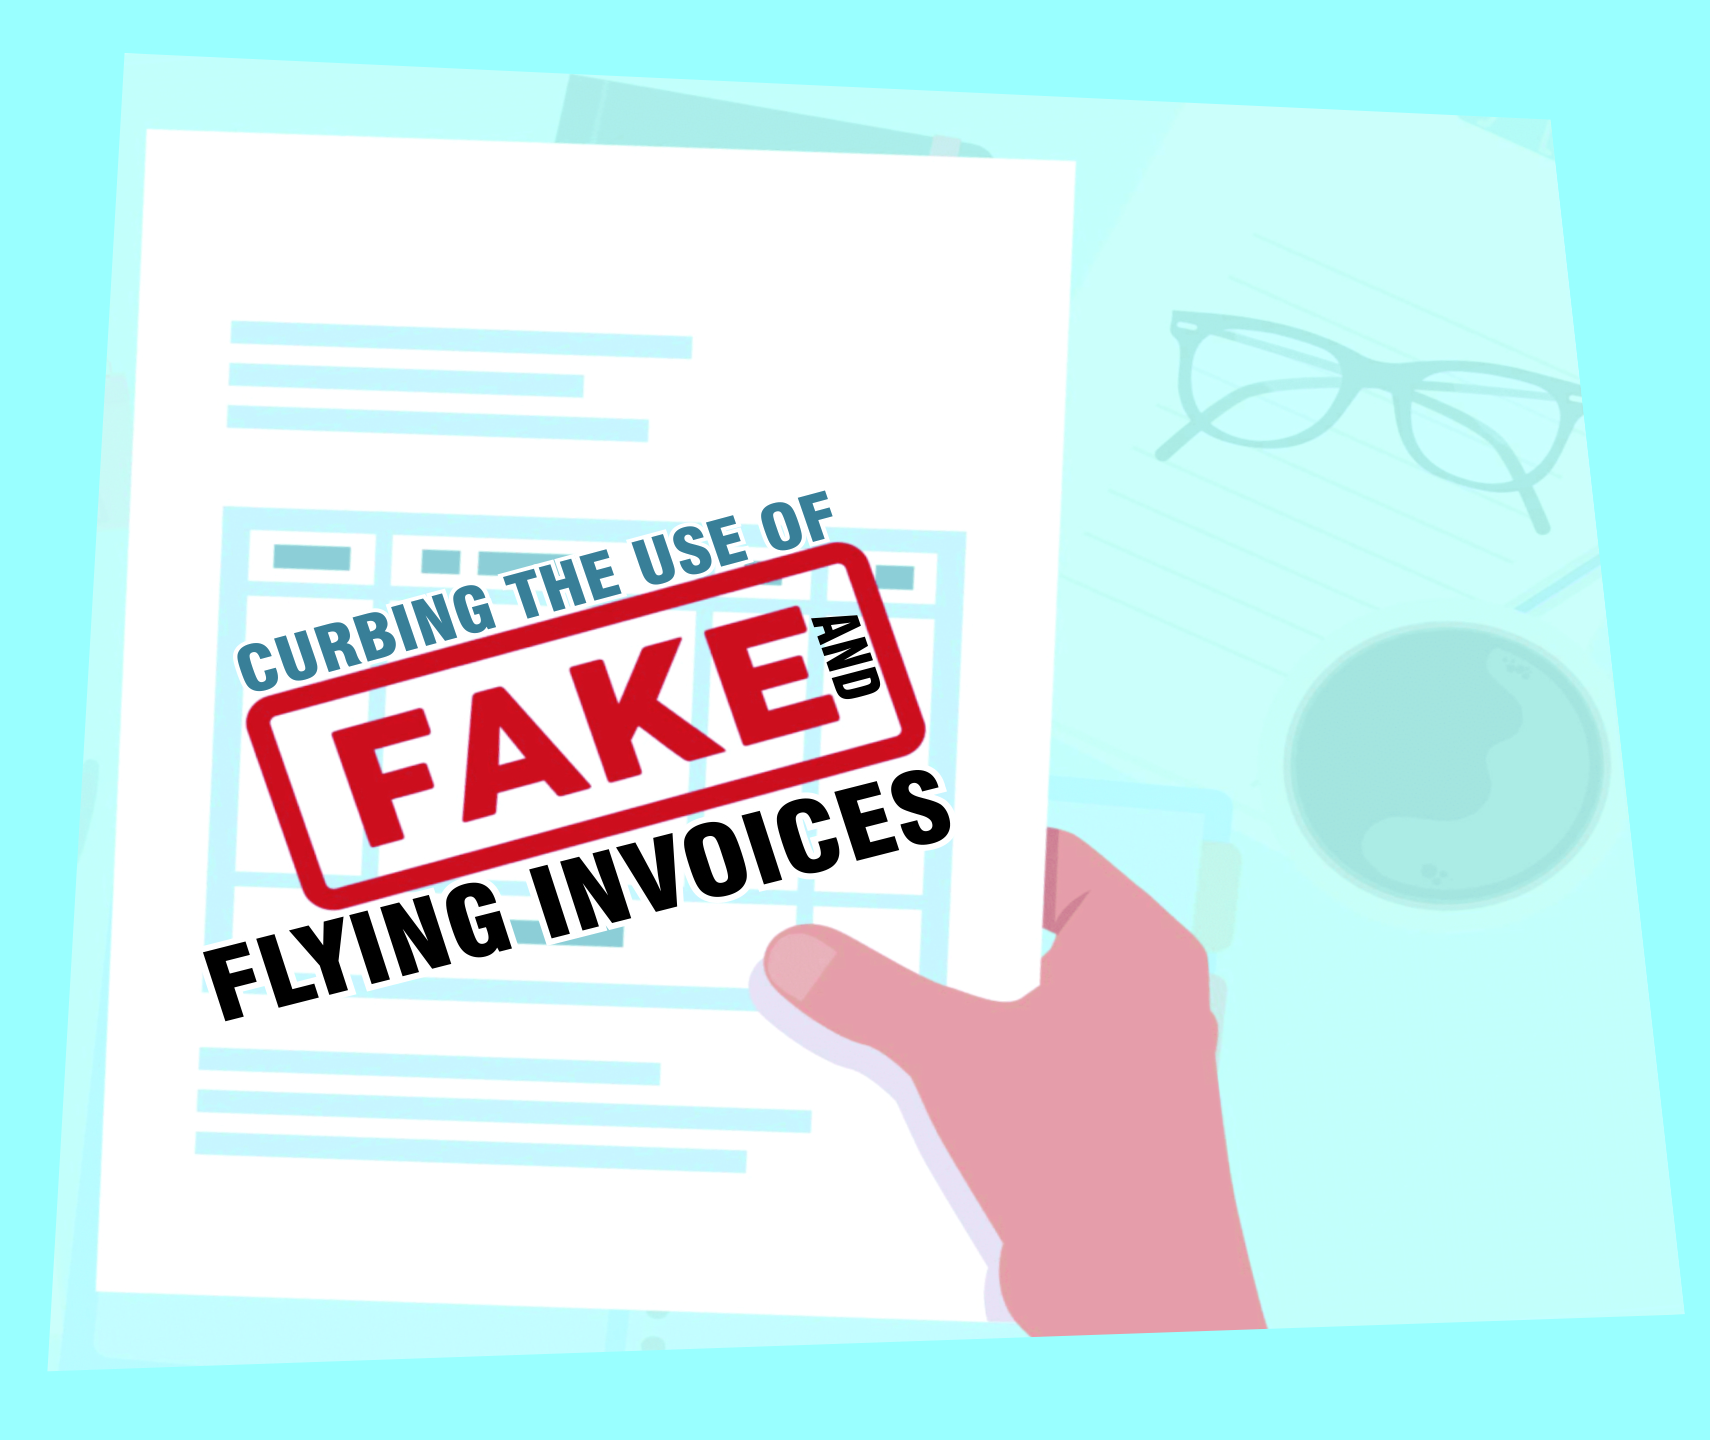 You are currently viewing Curbing the use of Fake and Flying Invoices